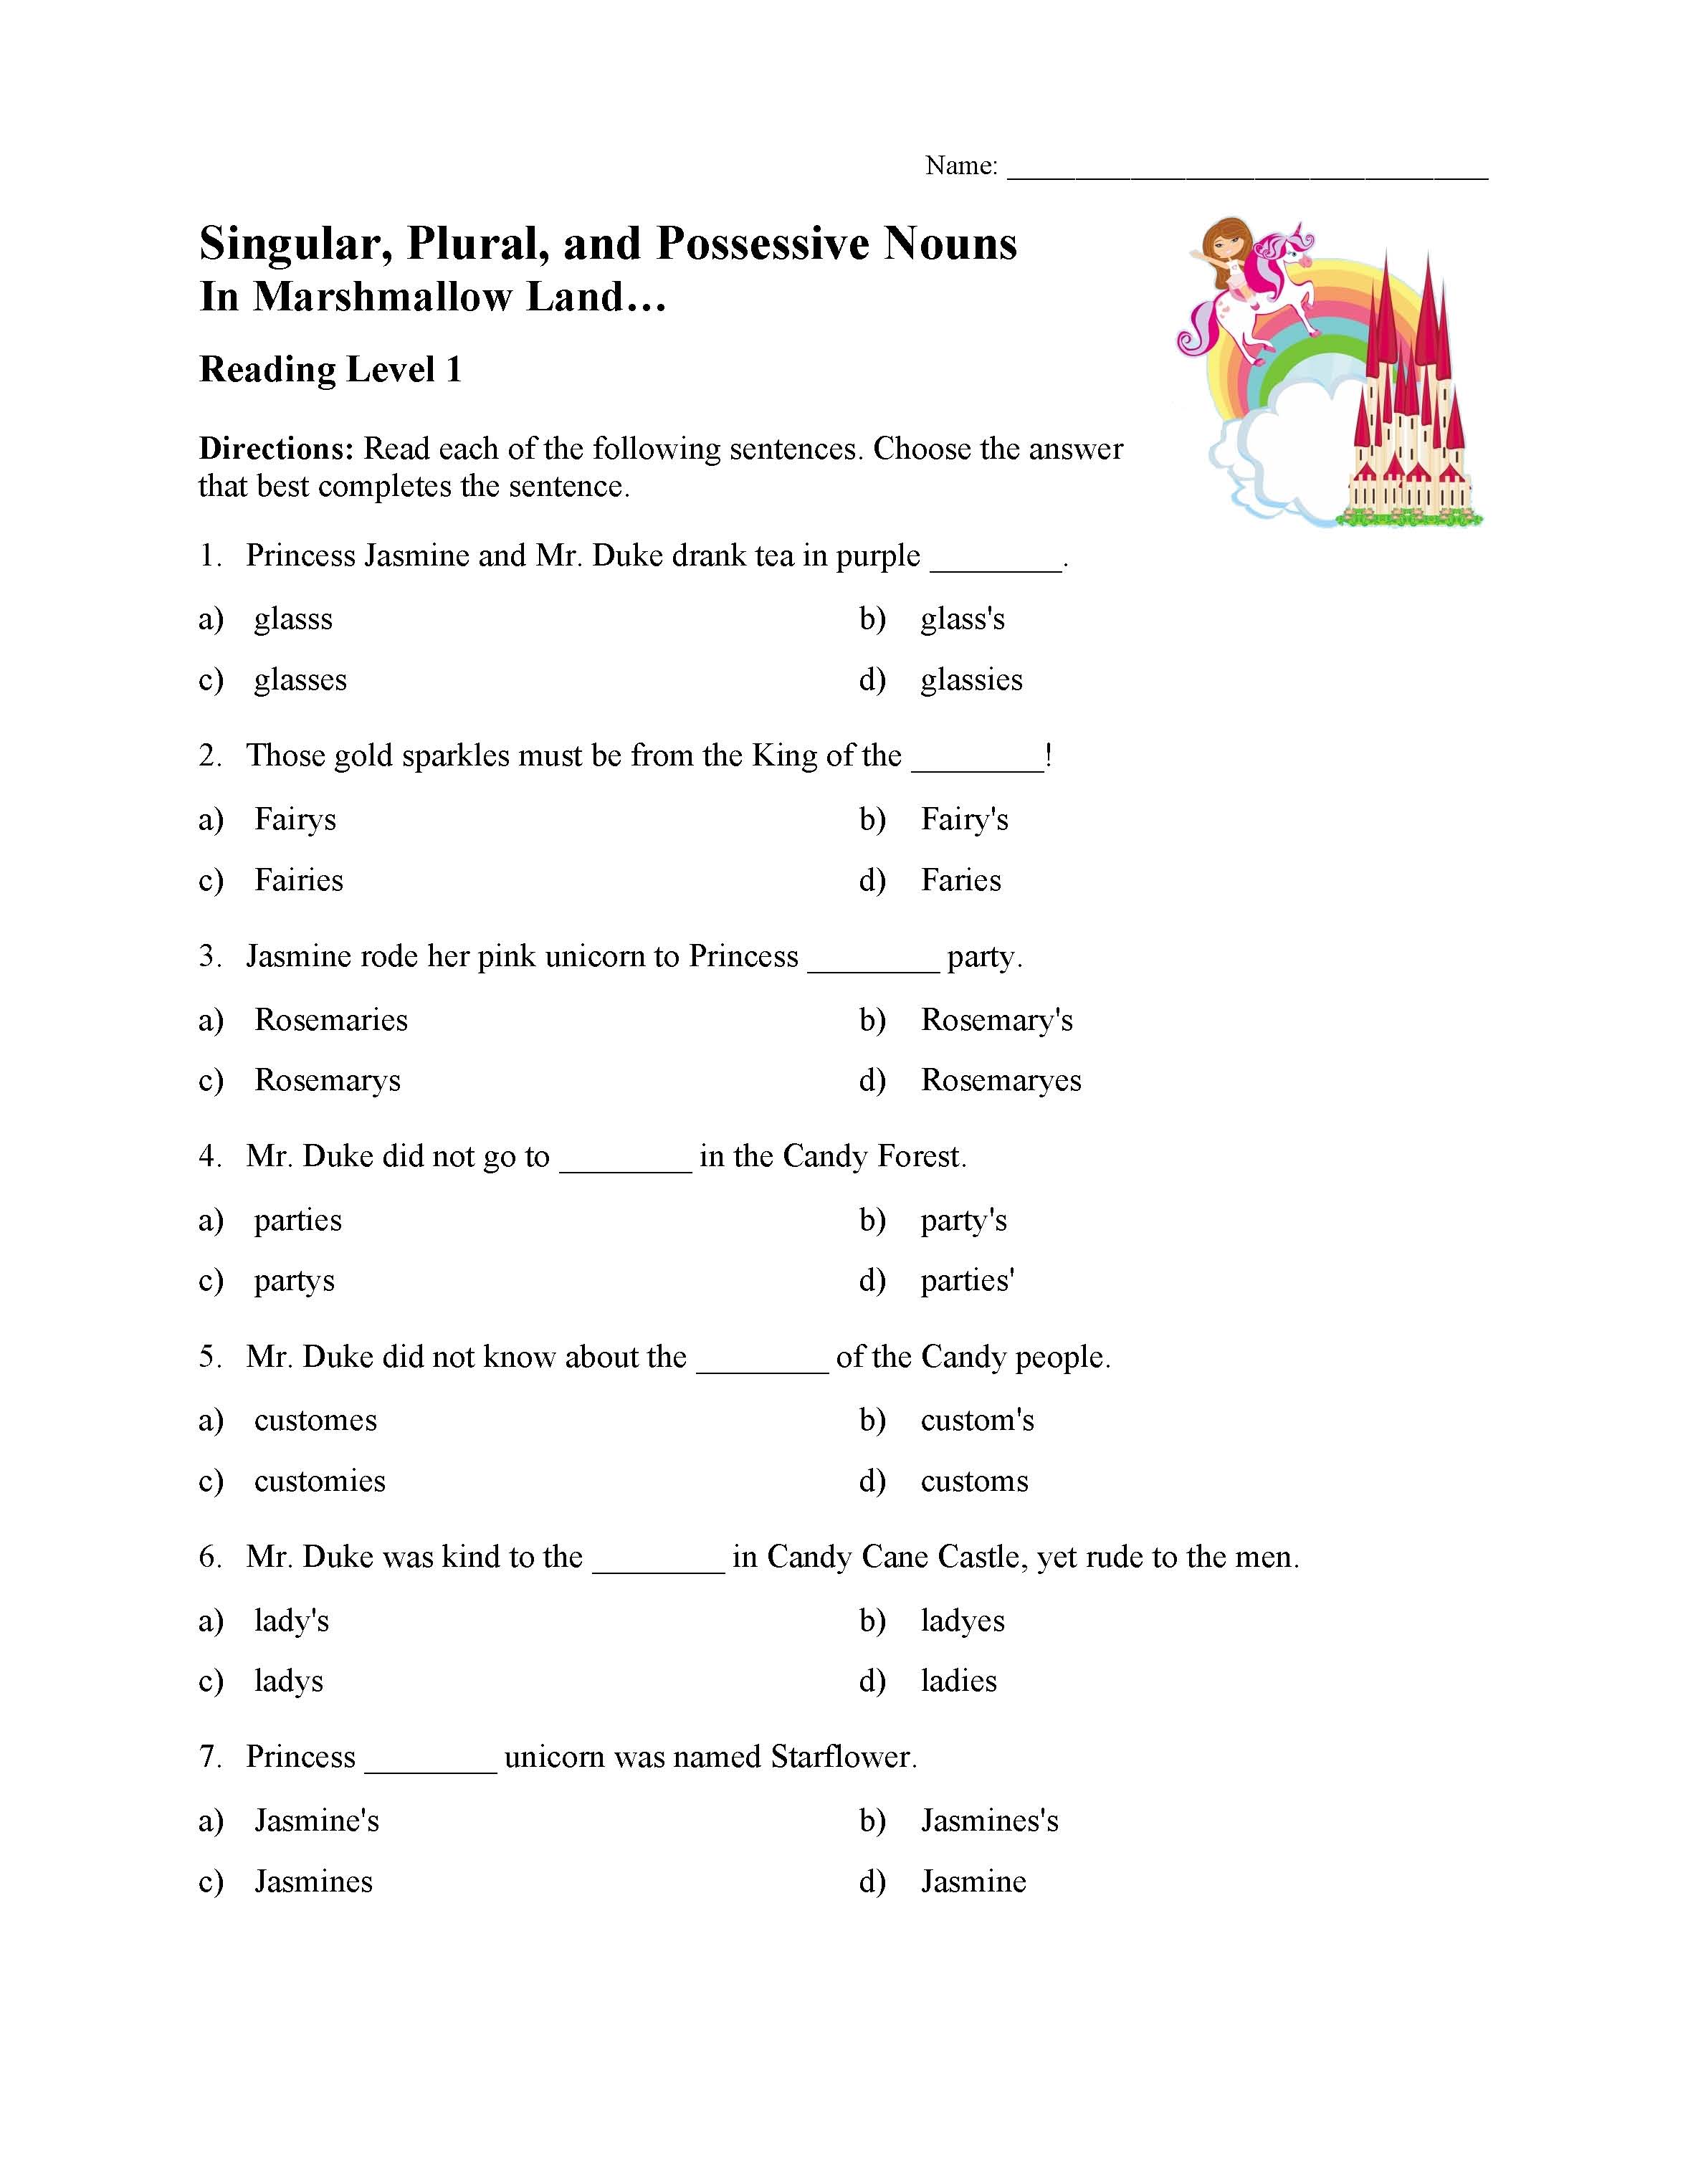 This is a preview image of the Singular, Plural, and Possessive Nouns Test 1 | Reading Level 1.